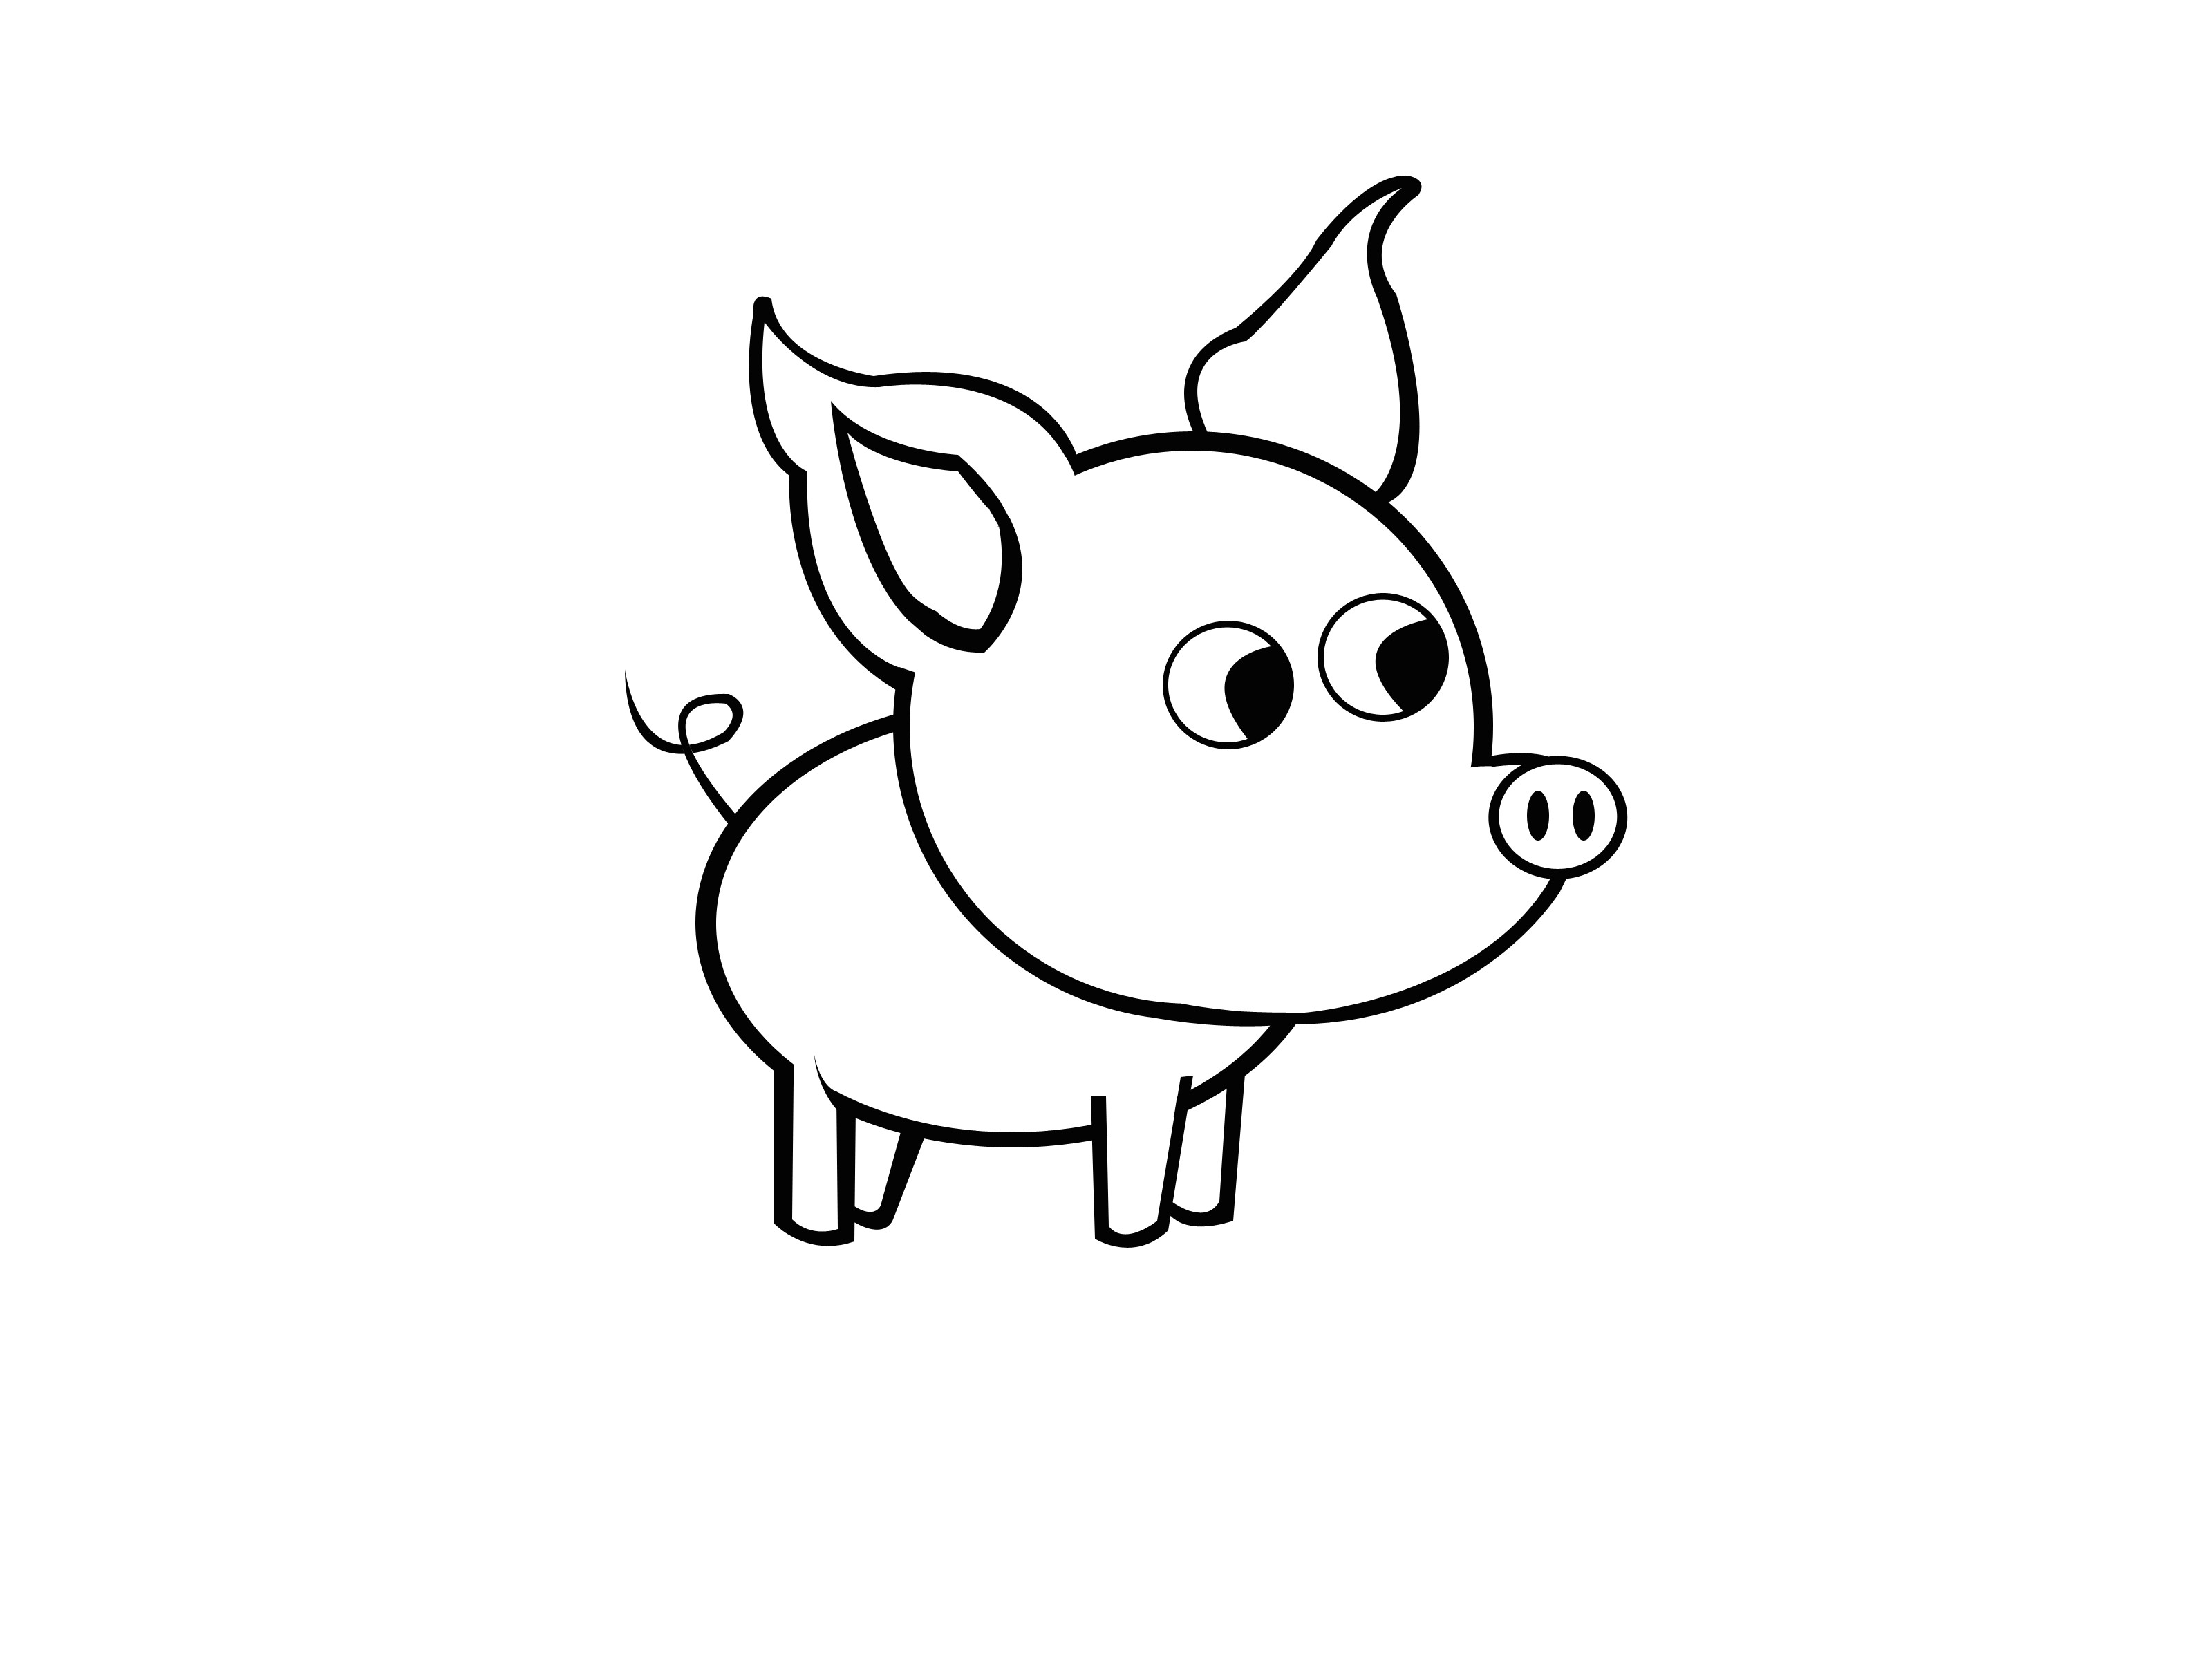 Drawing Easy Methods How to Draw A Simple Pig 9 Steps with Pictures Wikihow